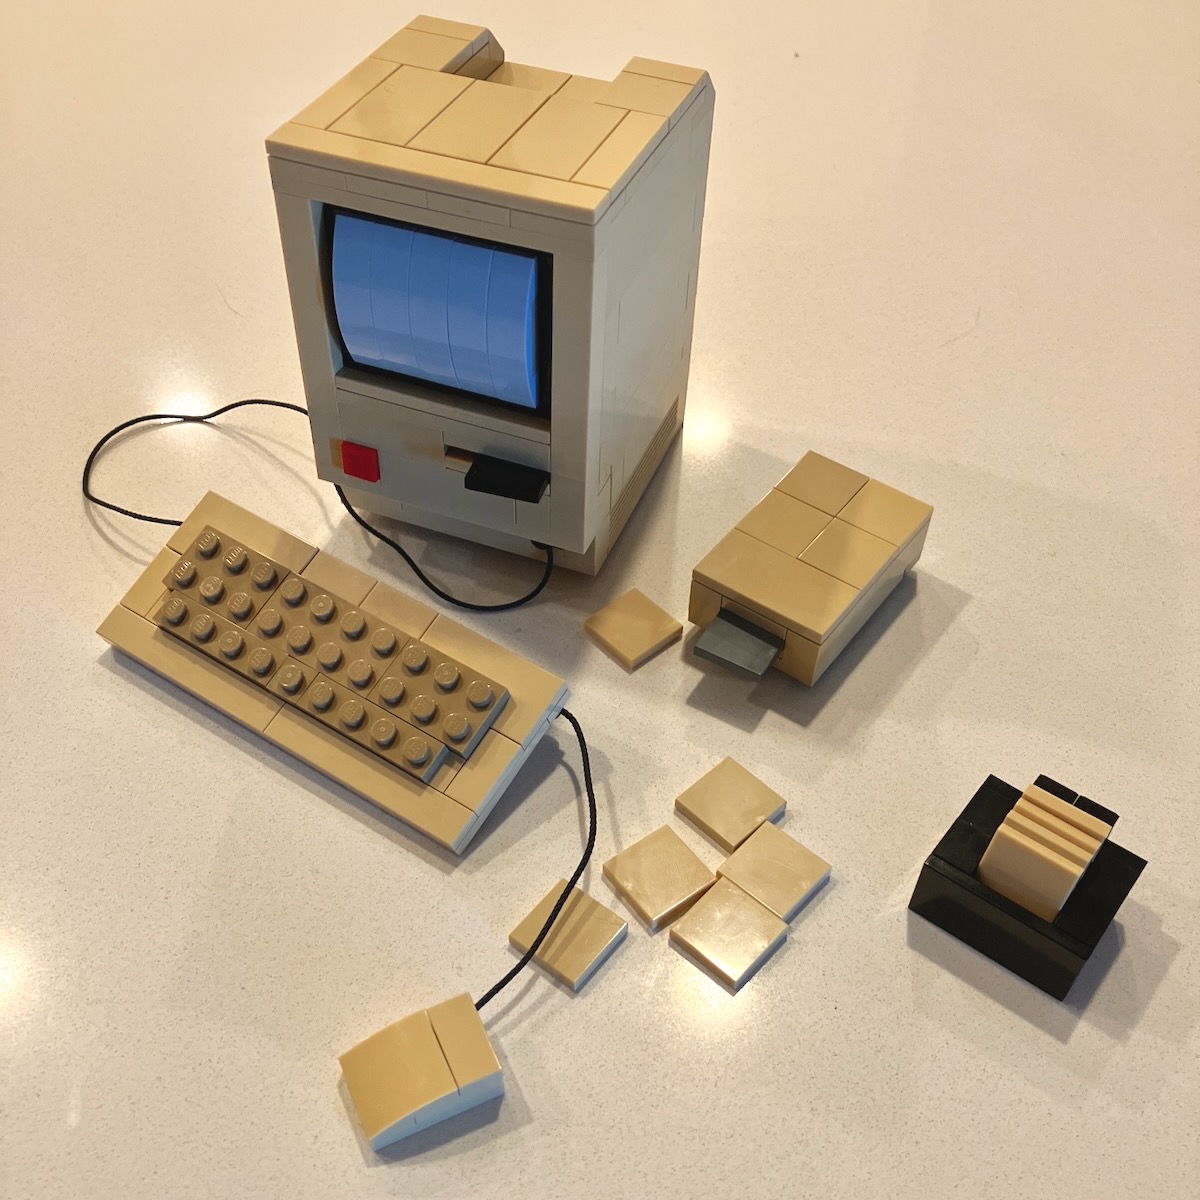 Macintosh with floppy drive and floppies